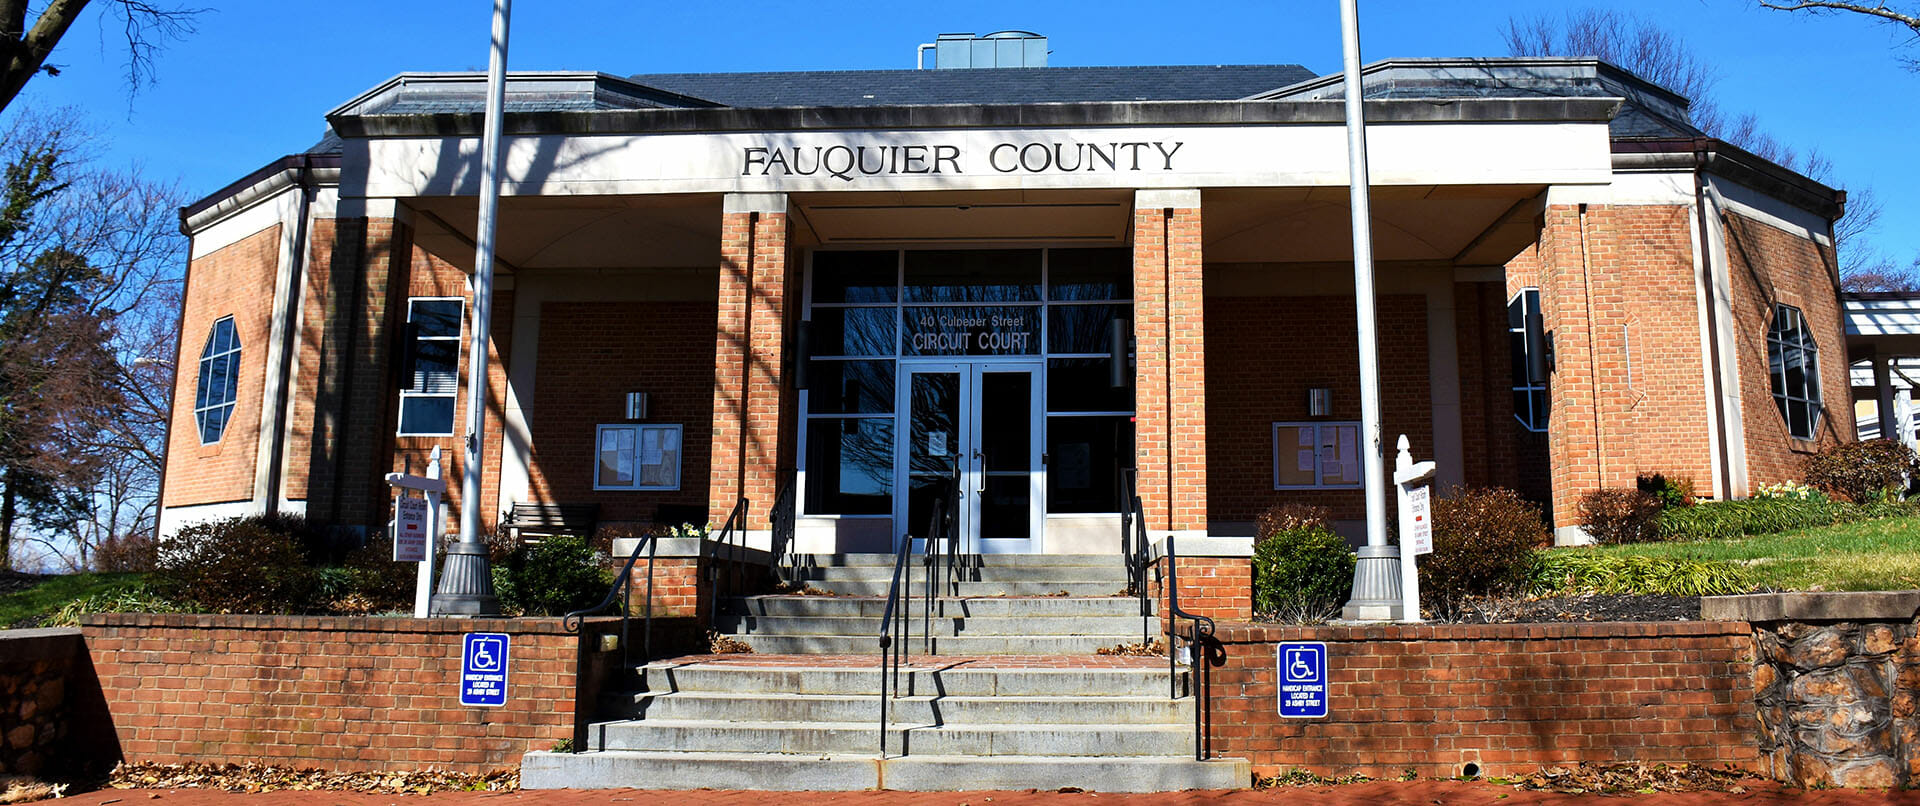 Fauquier Bar Association - Circuit Court photo accompanies legal resources list in the county